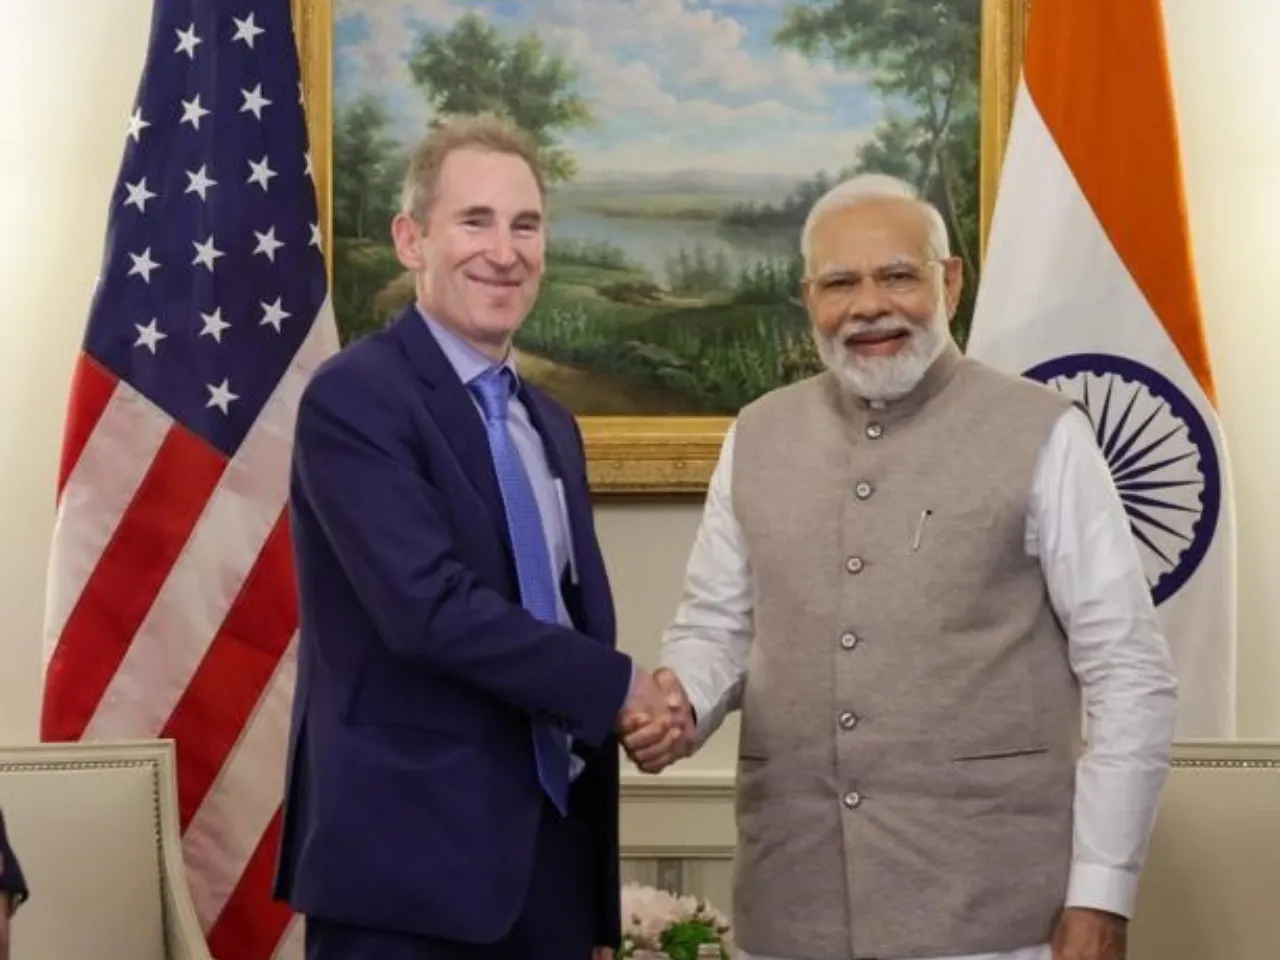 Amazon CEO Andy Jassy and Indian Prime Minister Narendra Modi